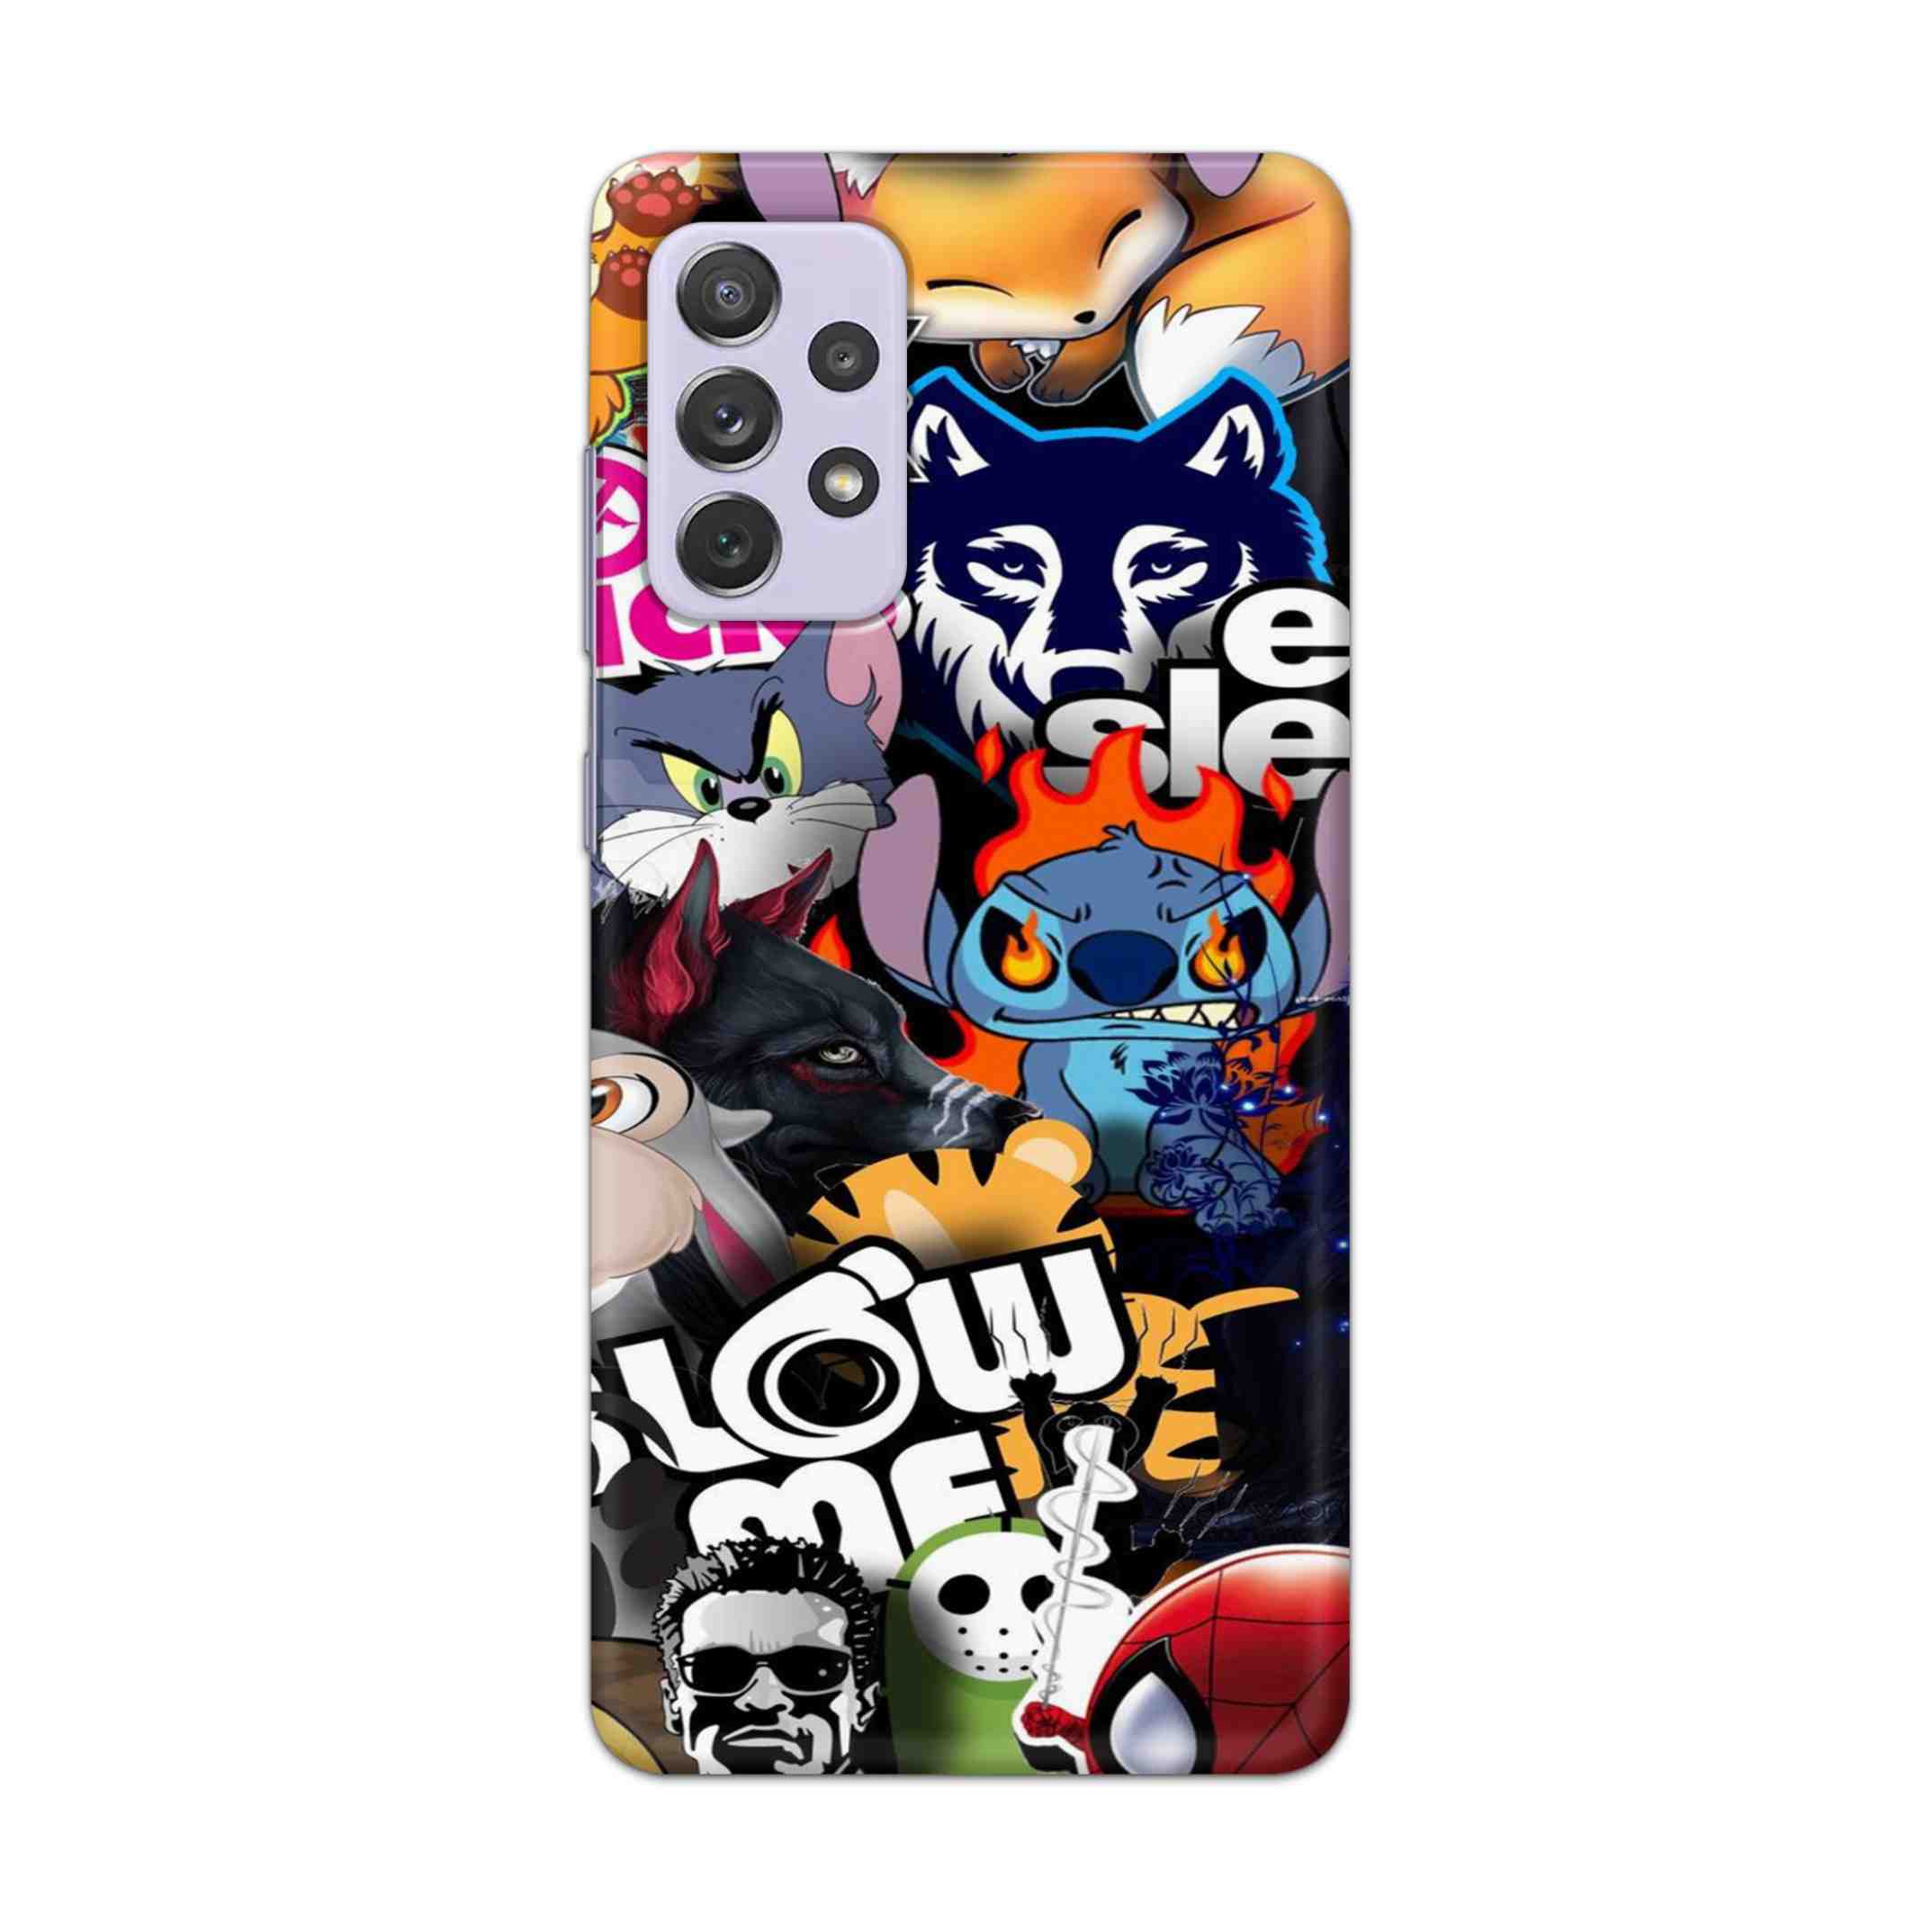 Buy Blow Me Hard Back Mobile Phone Case Cover For Samsung Galaxy A72 Online